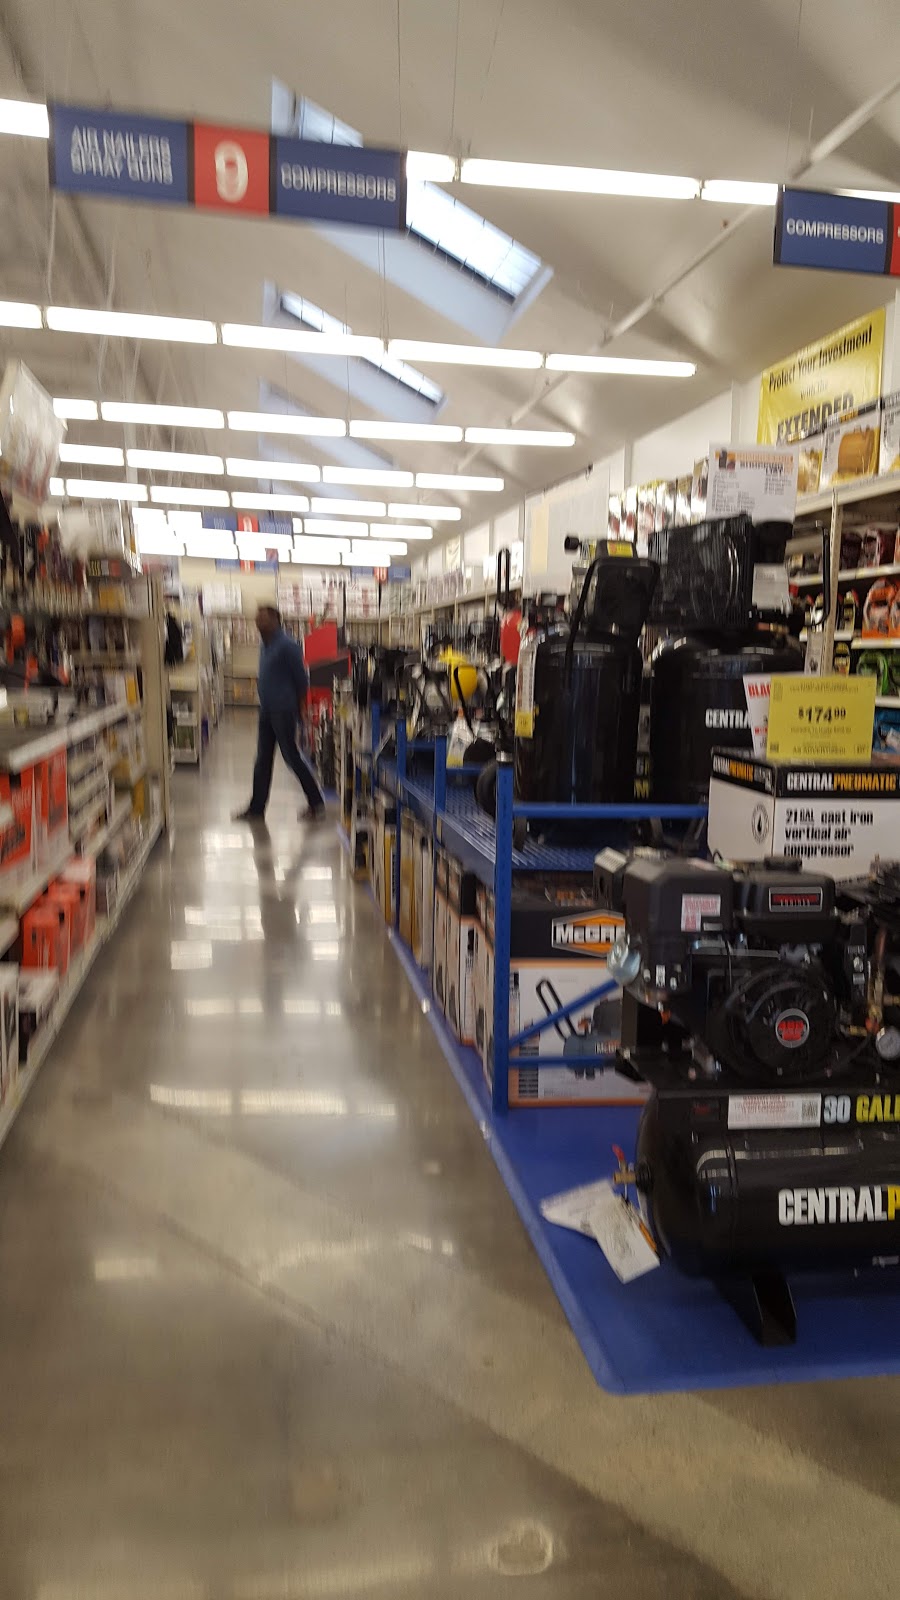 Harbor Freight Tools | 5101 Mowry Ave, Fremont, CA 94538 | Phone: (510) 791-3068